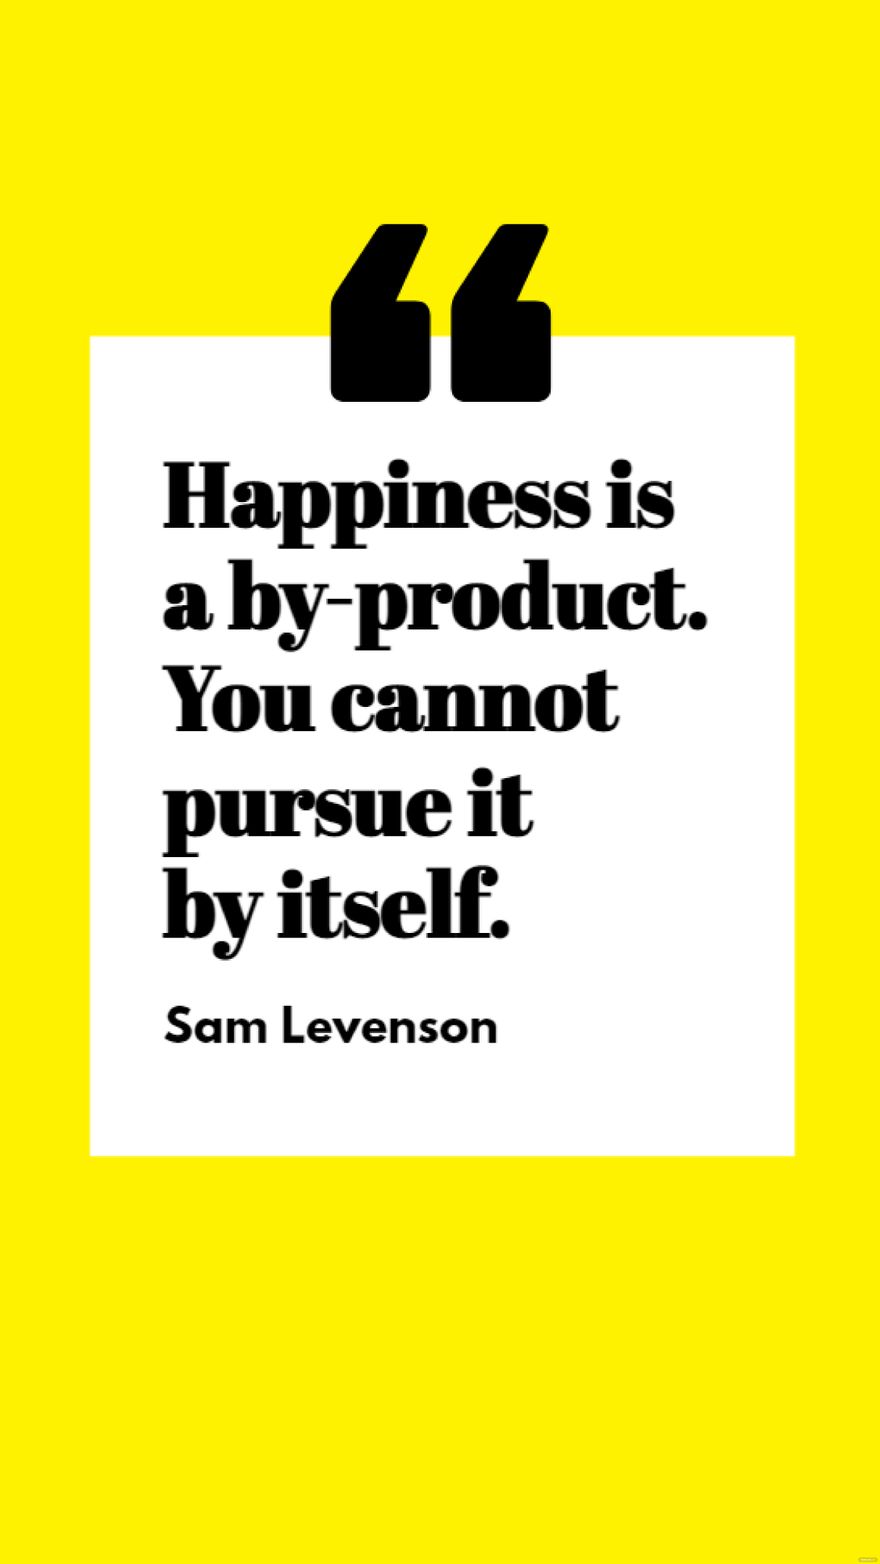 Free Sam Levenson - Happiness is a by-product. You cannot pursue it by itself.